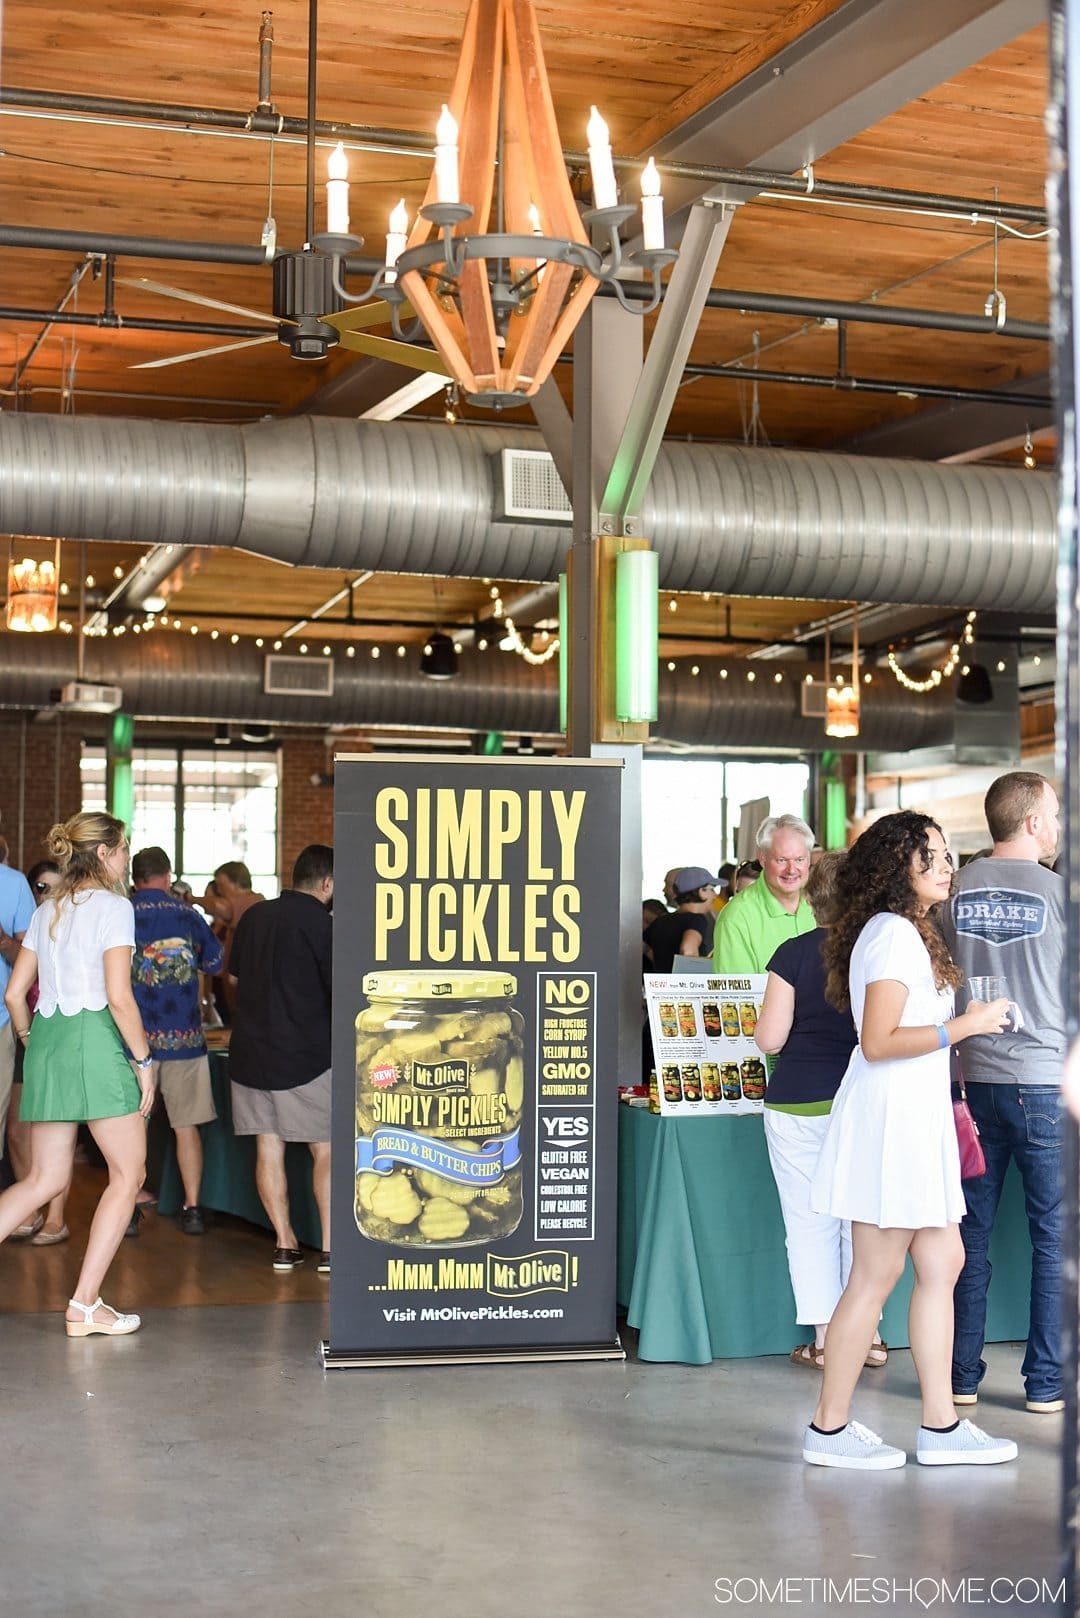 Durham North Carolina Events PickleFest on Sometimes Home travel blog. Pickled cucumbers, peaches, bamboo and more.